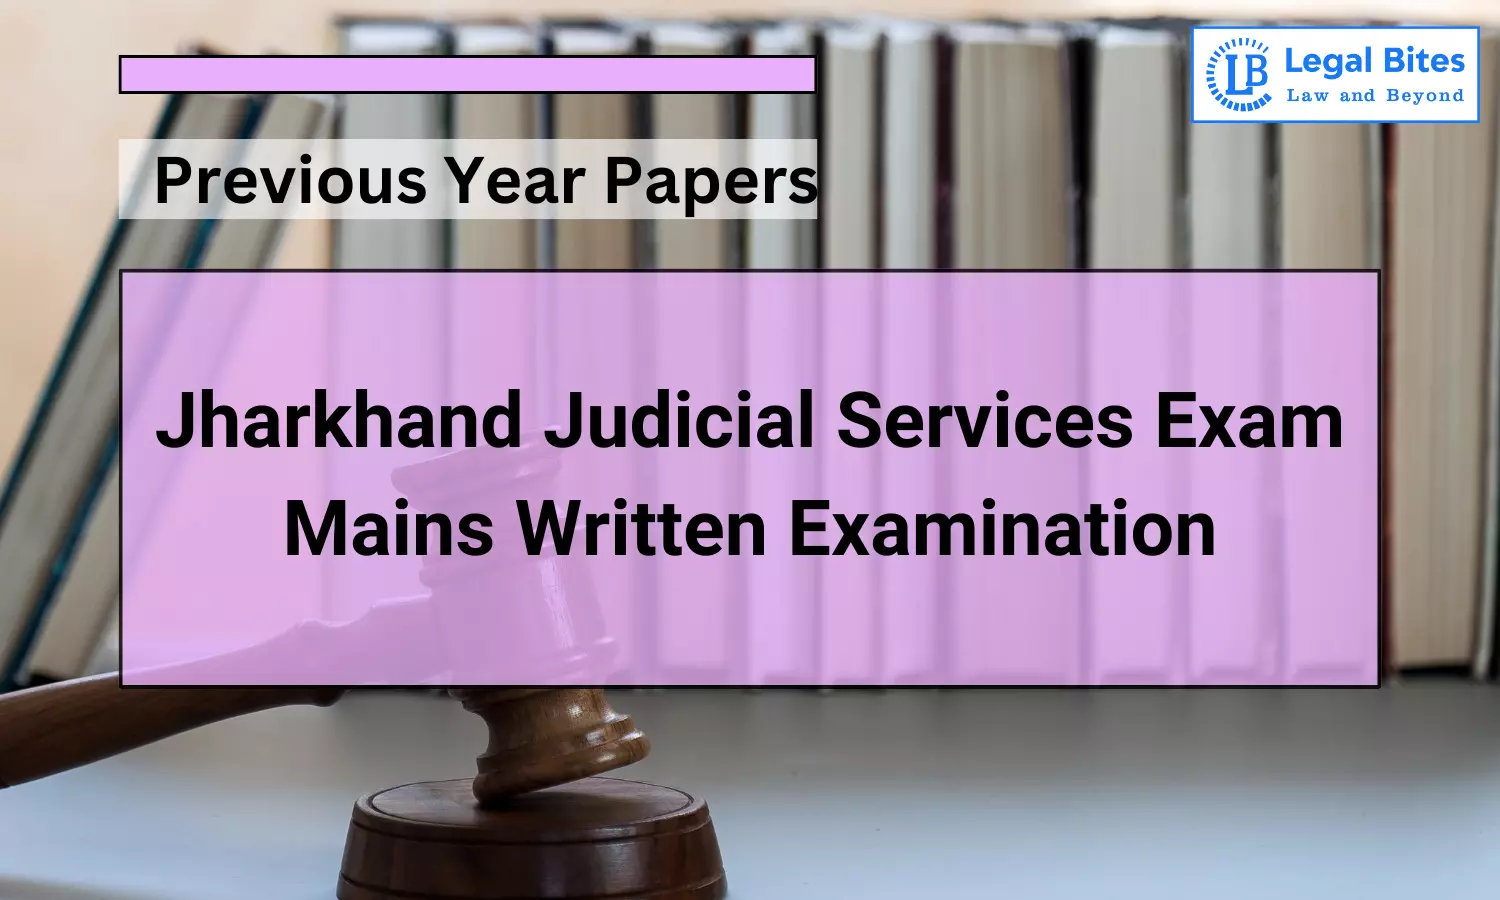 Jharkhand Judicial Services Exam Mains 2015 Previous Year Paper II | Transfer of Property Act, Contract Act, Sale of Goods Act, Negotiable Instruments Act, Arbitration and Conciliation Act